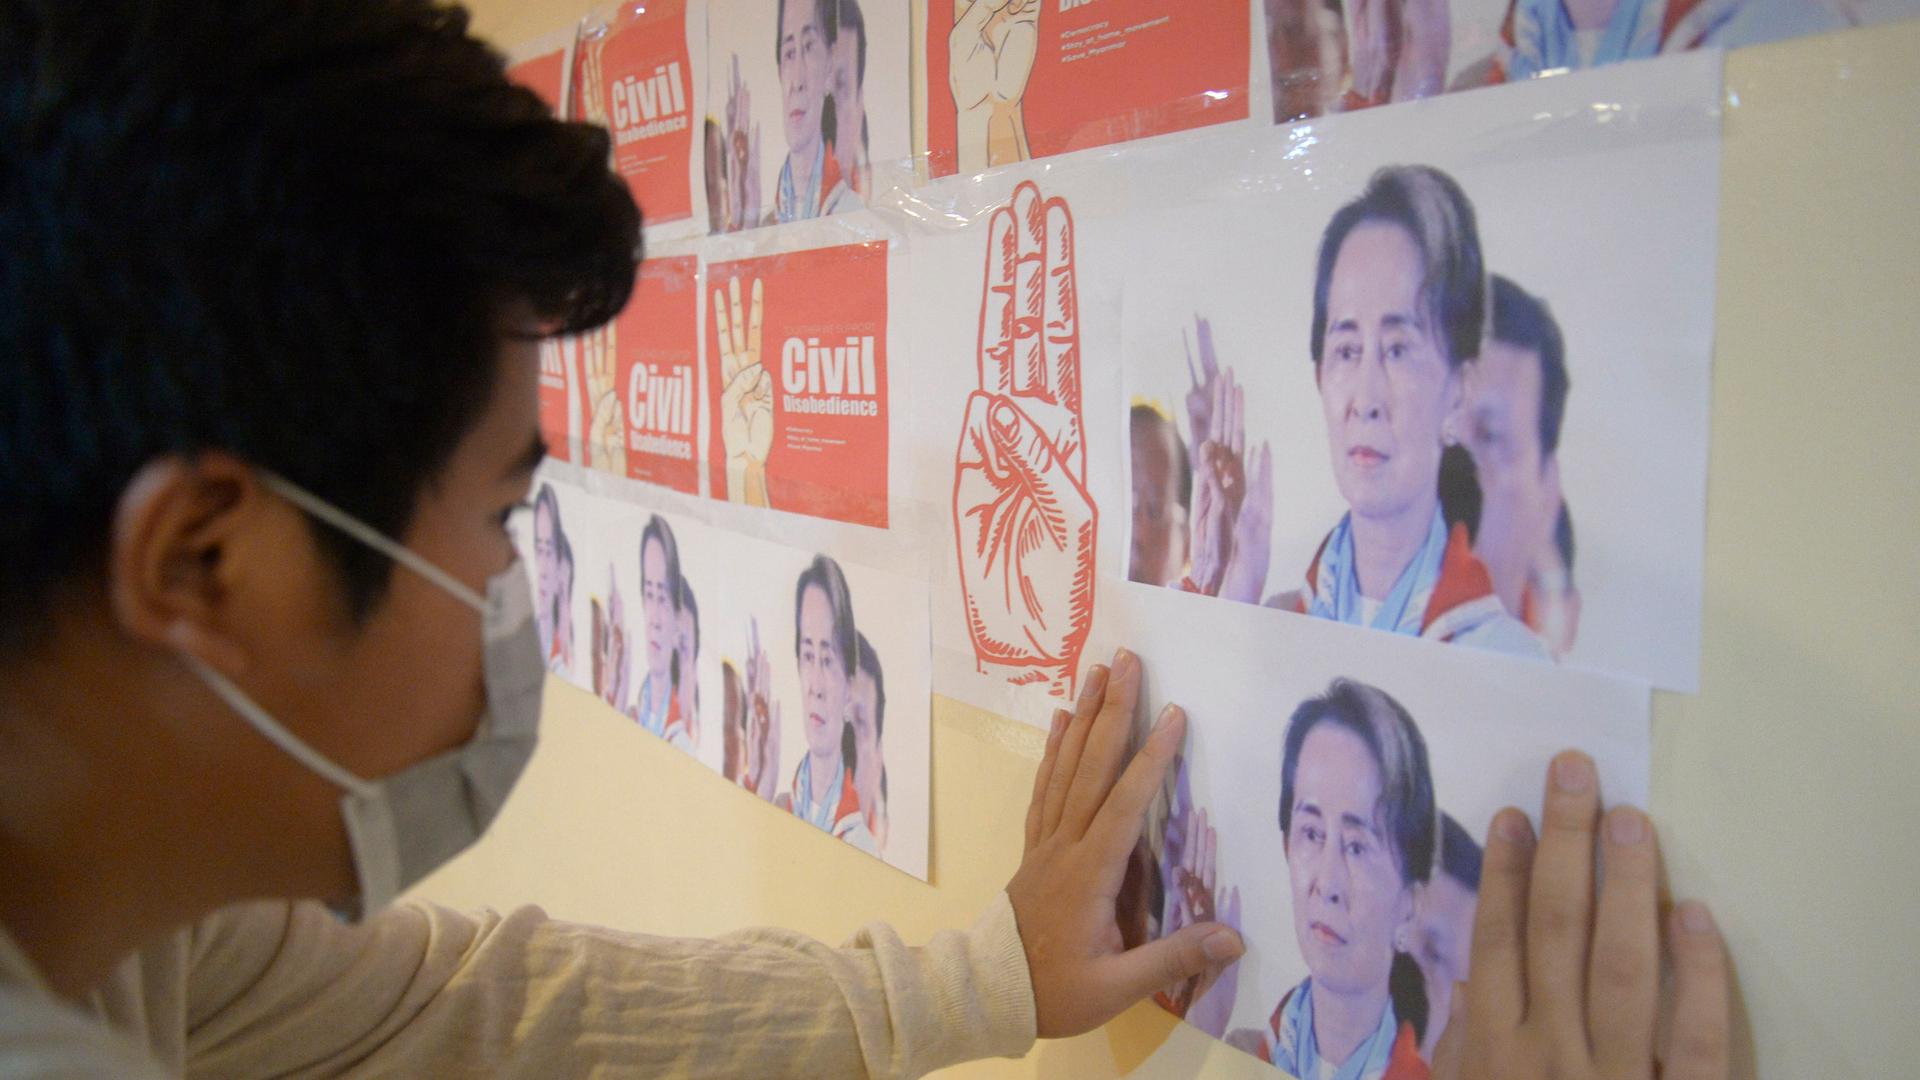 An anti-coup protester looks at the images of ousted Myanmar leader Aung San Suu Kyi during a protest against the military coup in Yangon, Myanmar, on April 26, 2021.